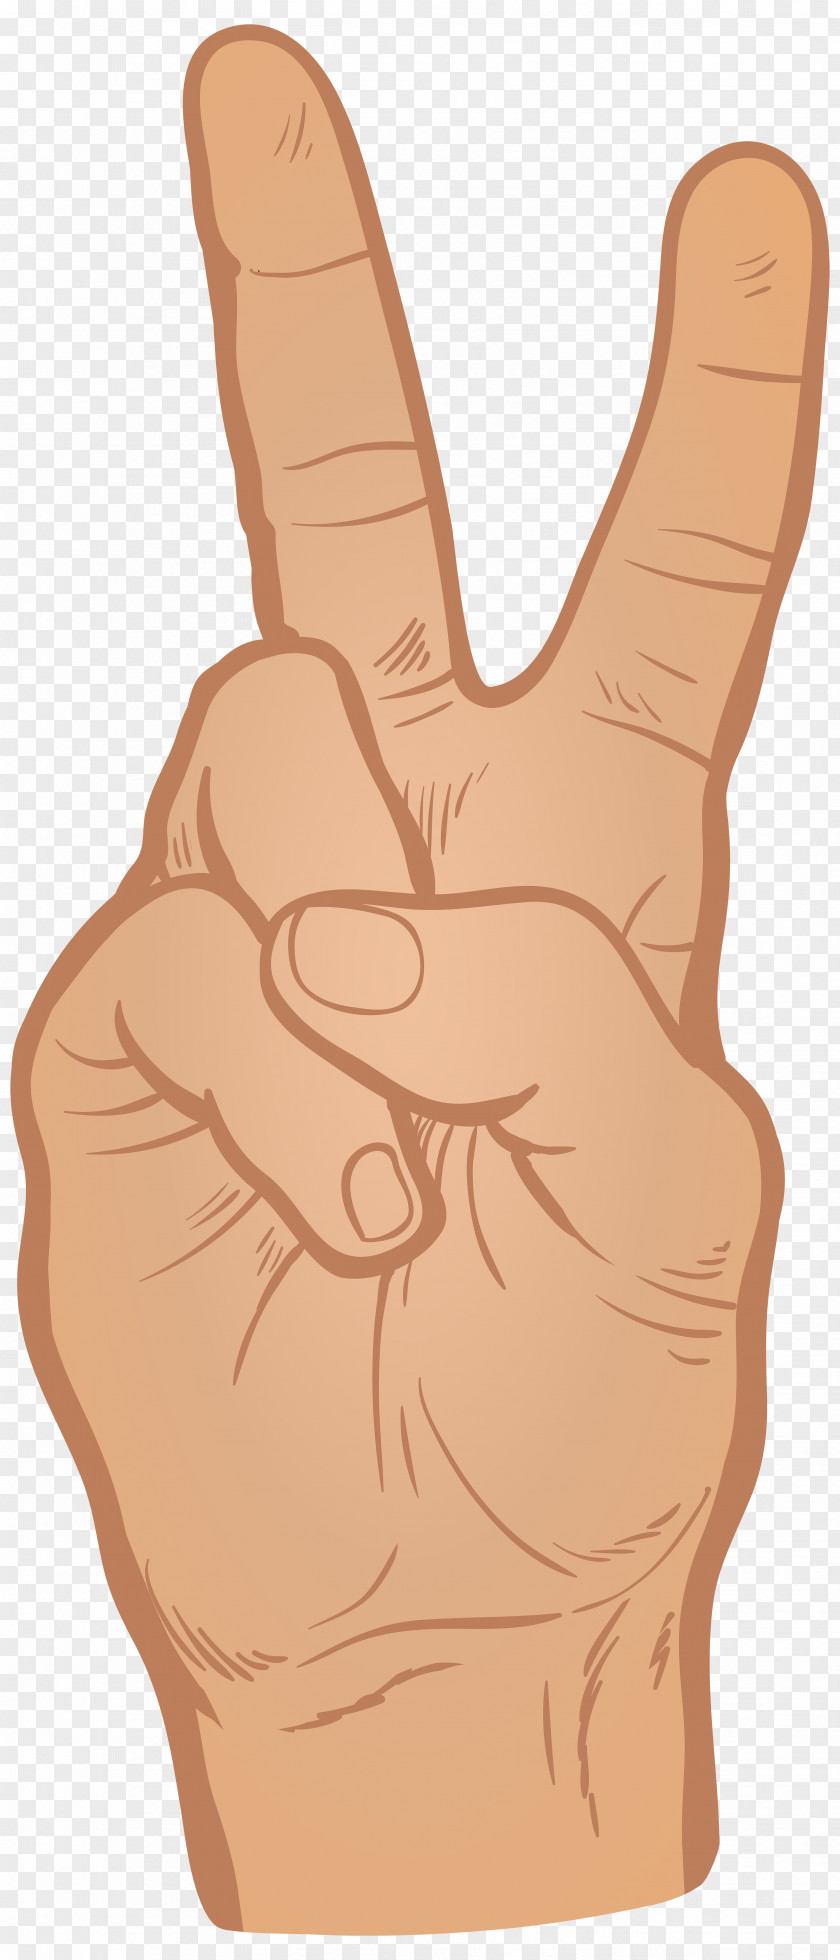 Hand Showing Victory Clip Art Image Thumb Illustration PNG